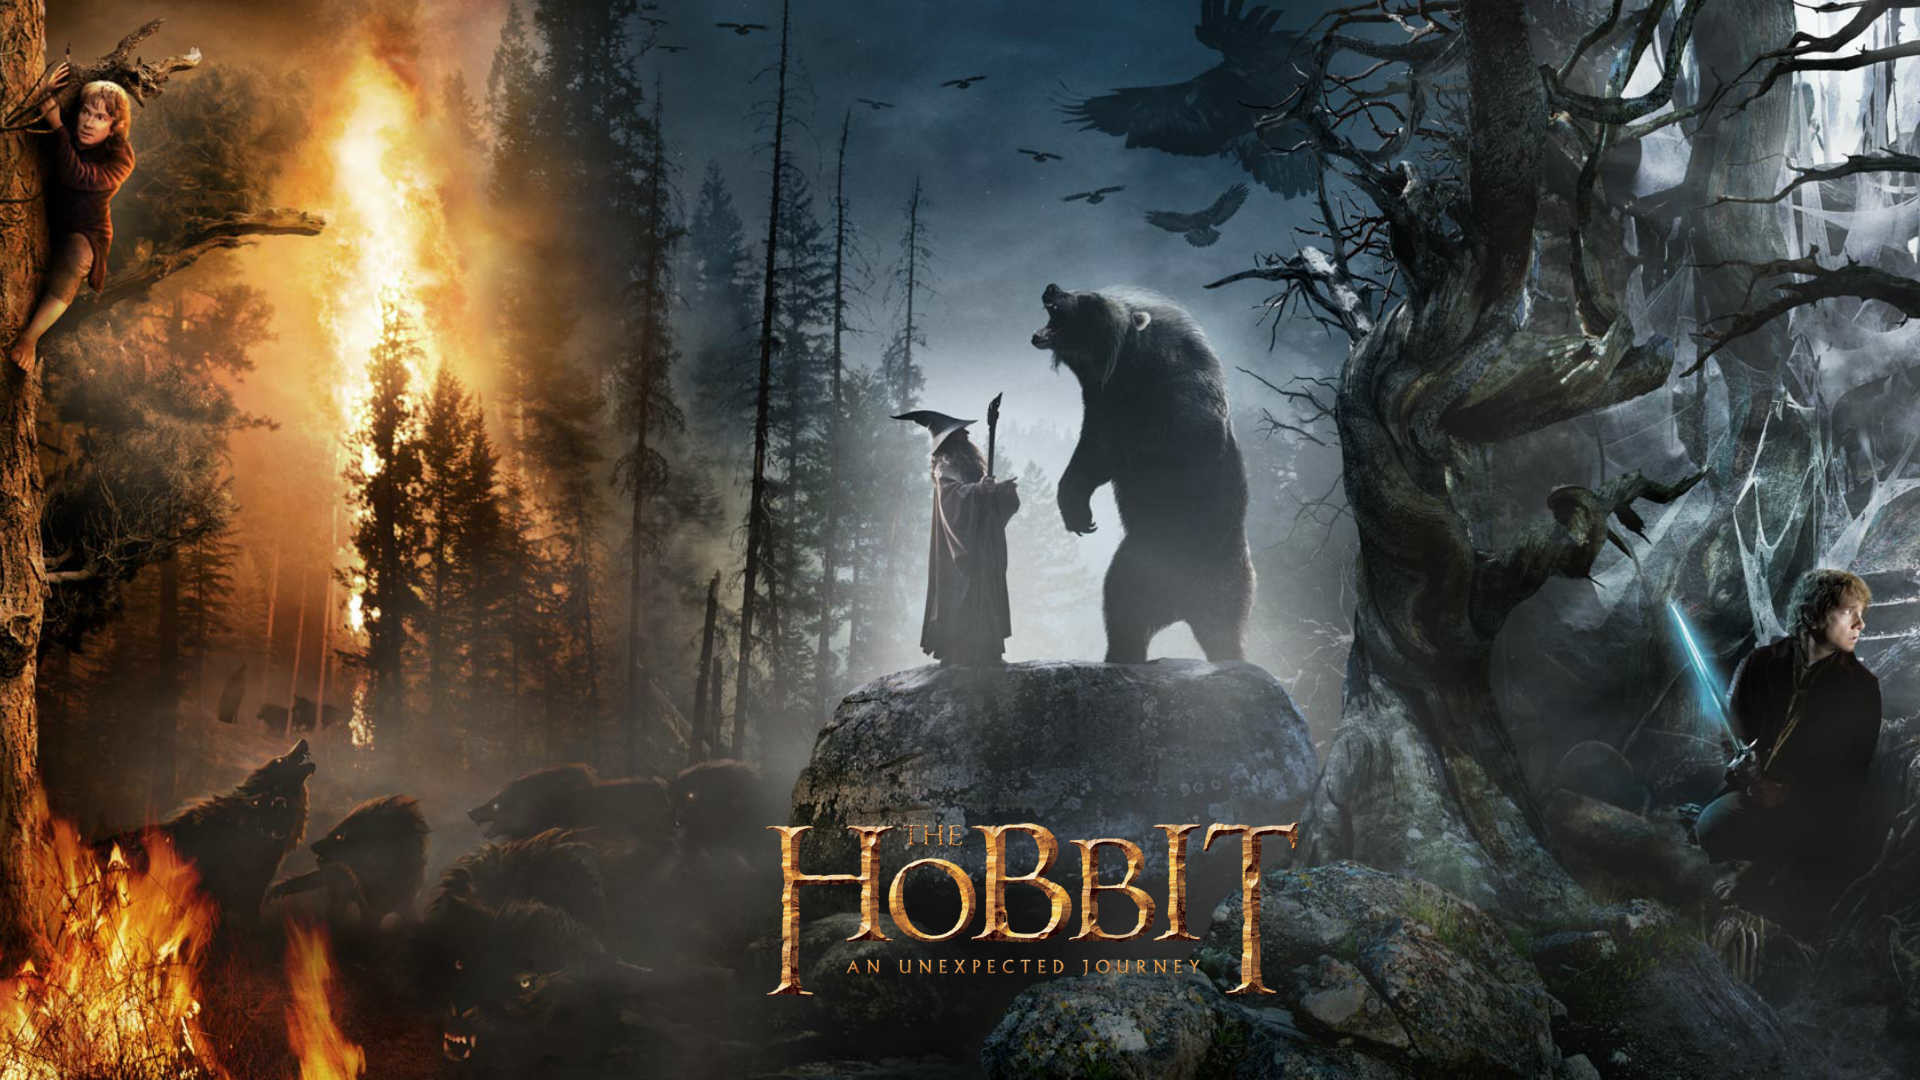 1920x1080 The Hobbit 2012 Movie Wallpapers | HD Wallpapers